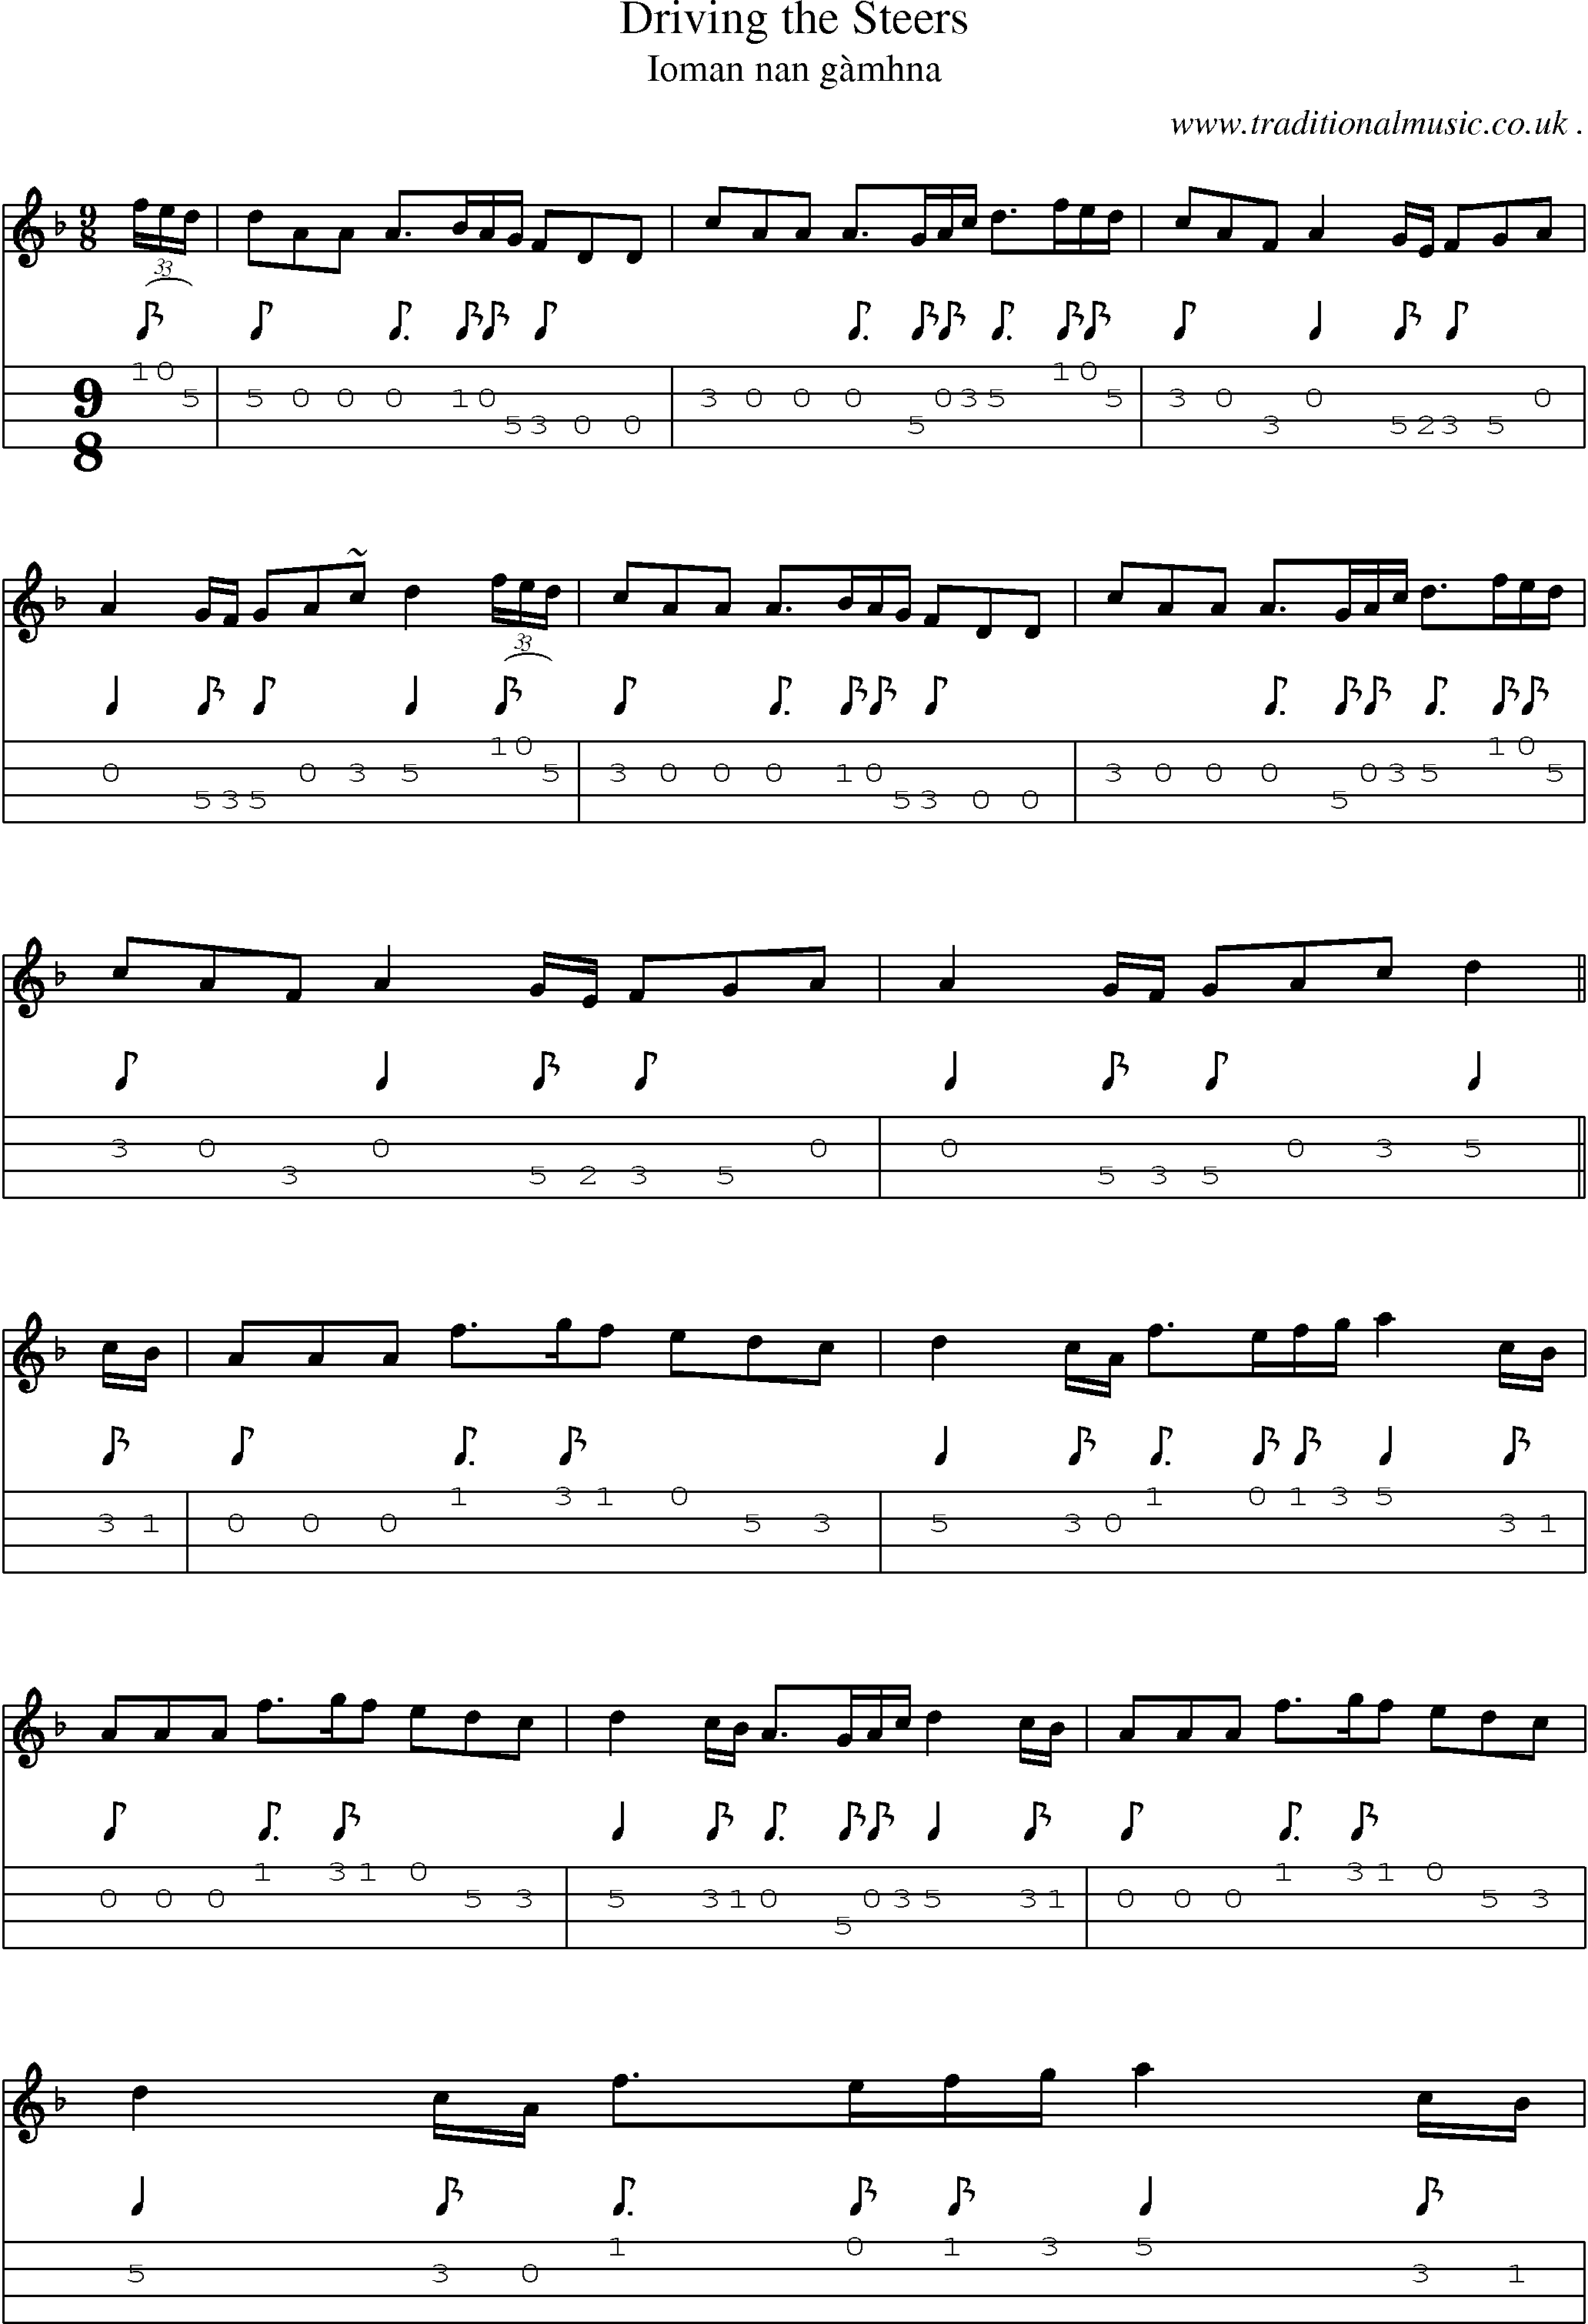 Sheet-music  score, Chords and Mandolin Tabs for Driving The Steers